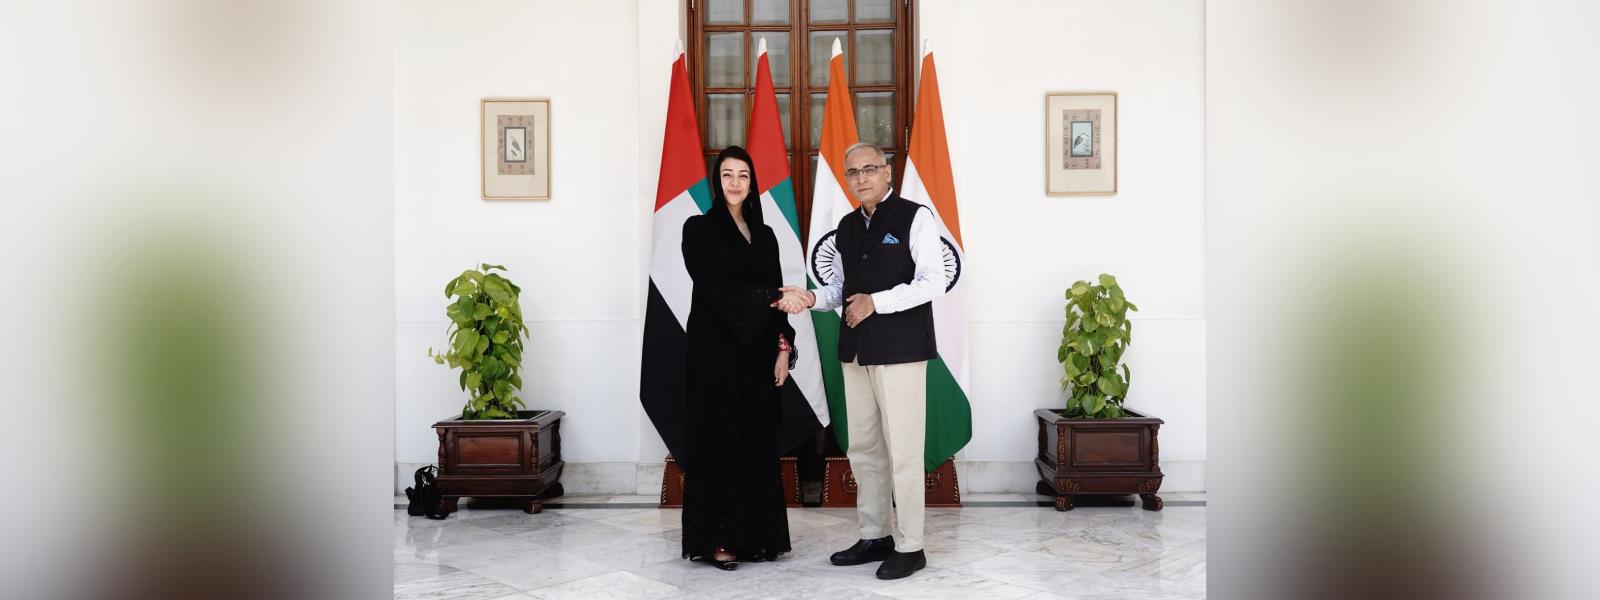 Foreign Secretary, Shri Vinay Kwatra met H.E. Ms. Reem Al Hashimy, Minister of State for International Cooperation of the United Arab Emirates in New Delhi